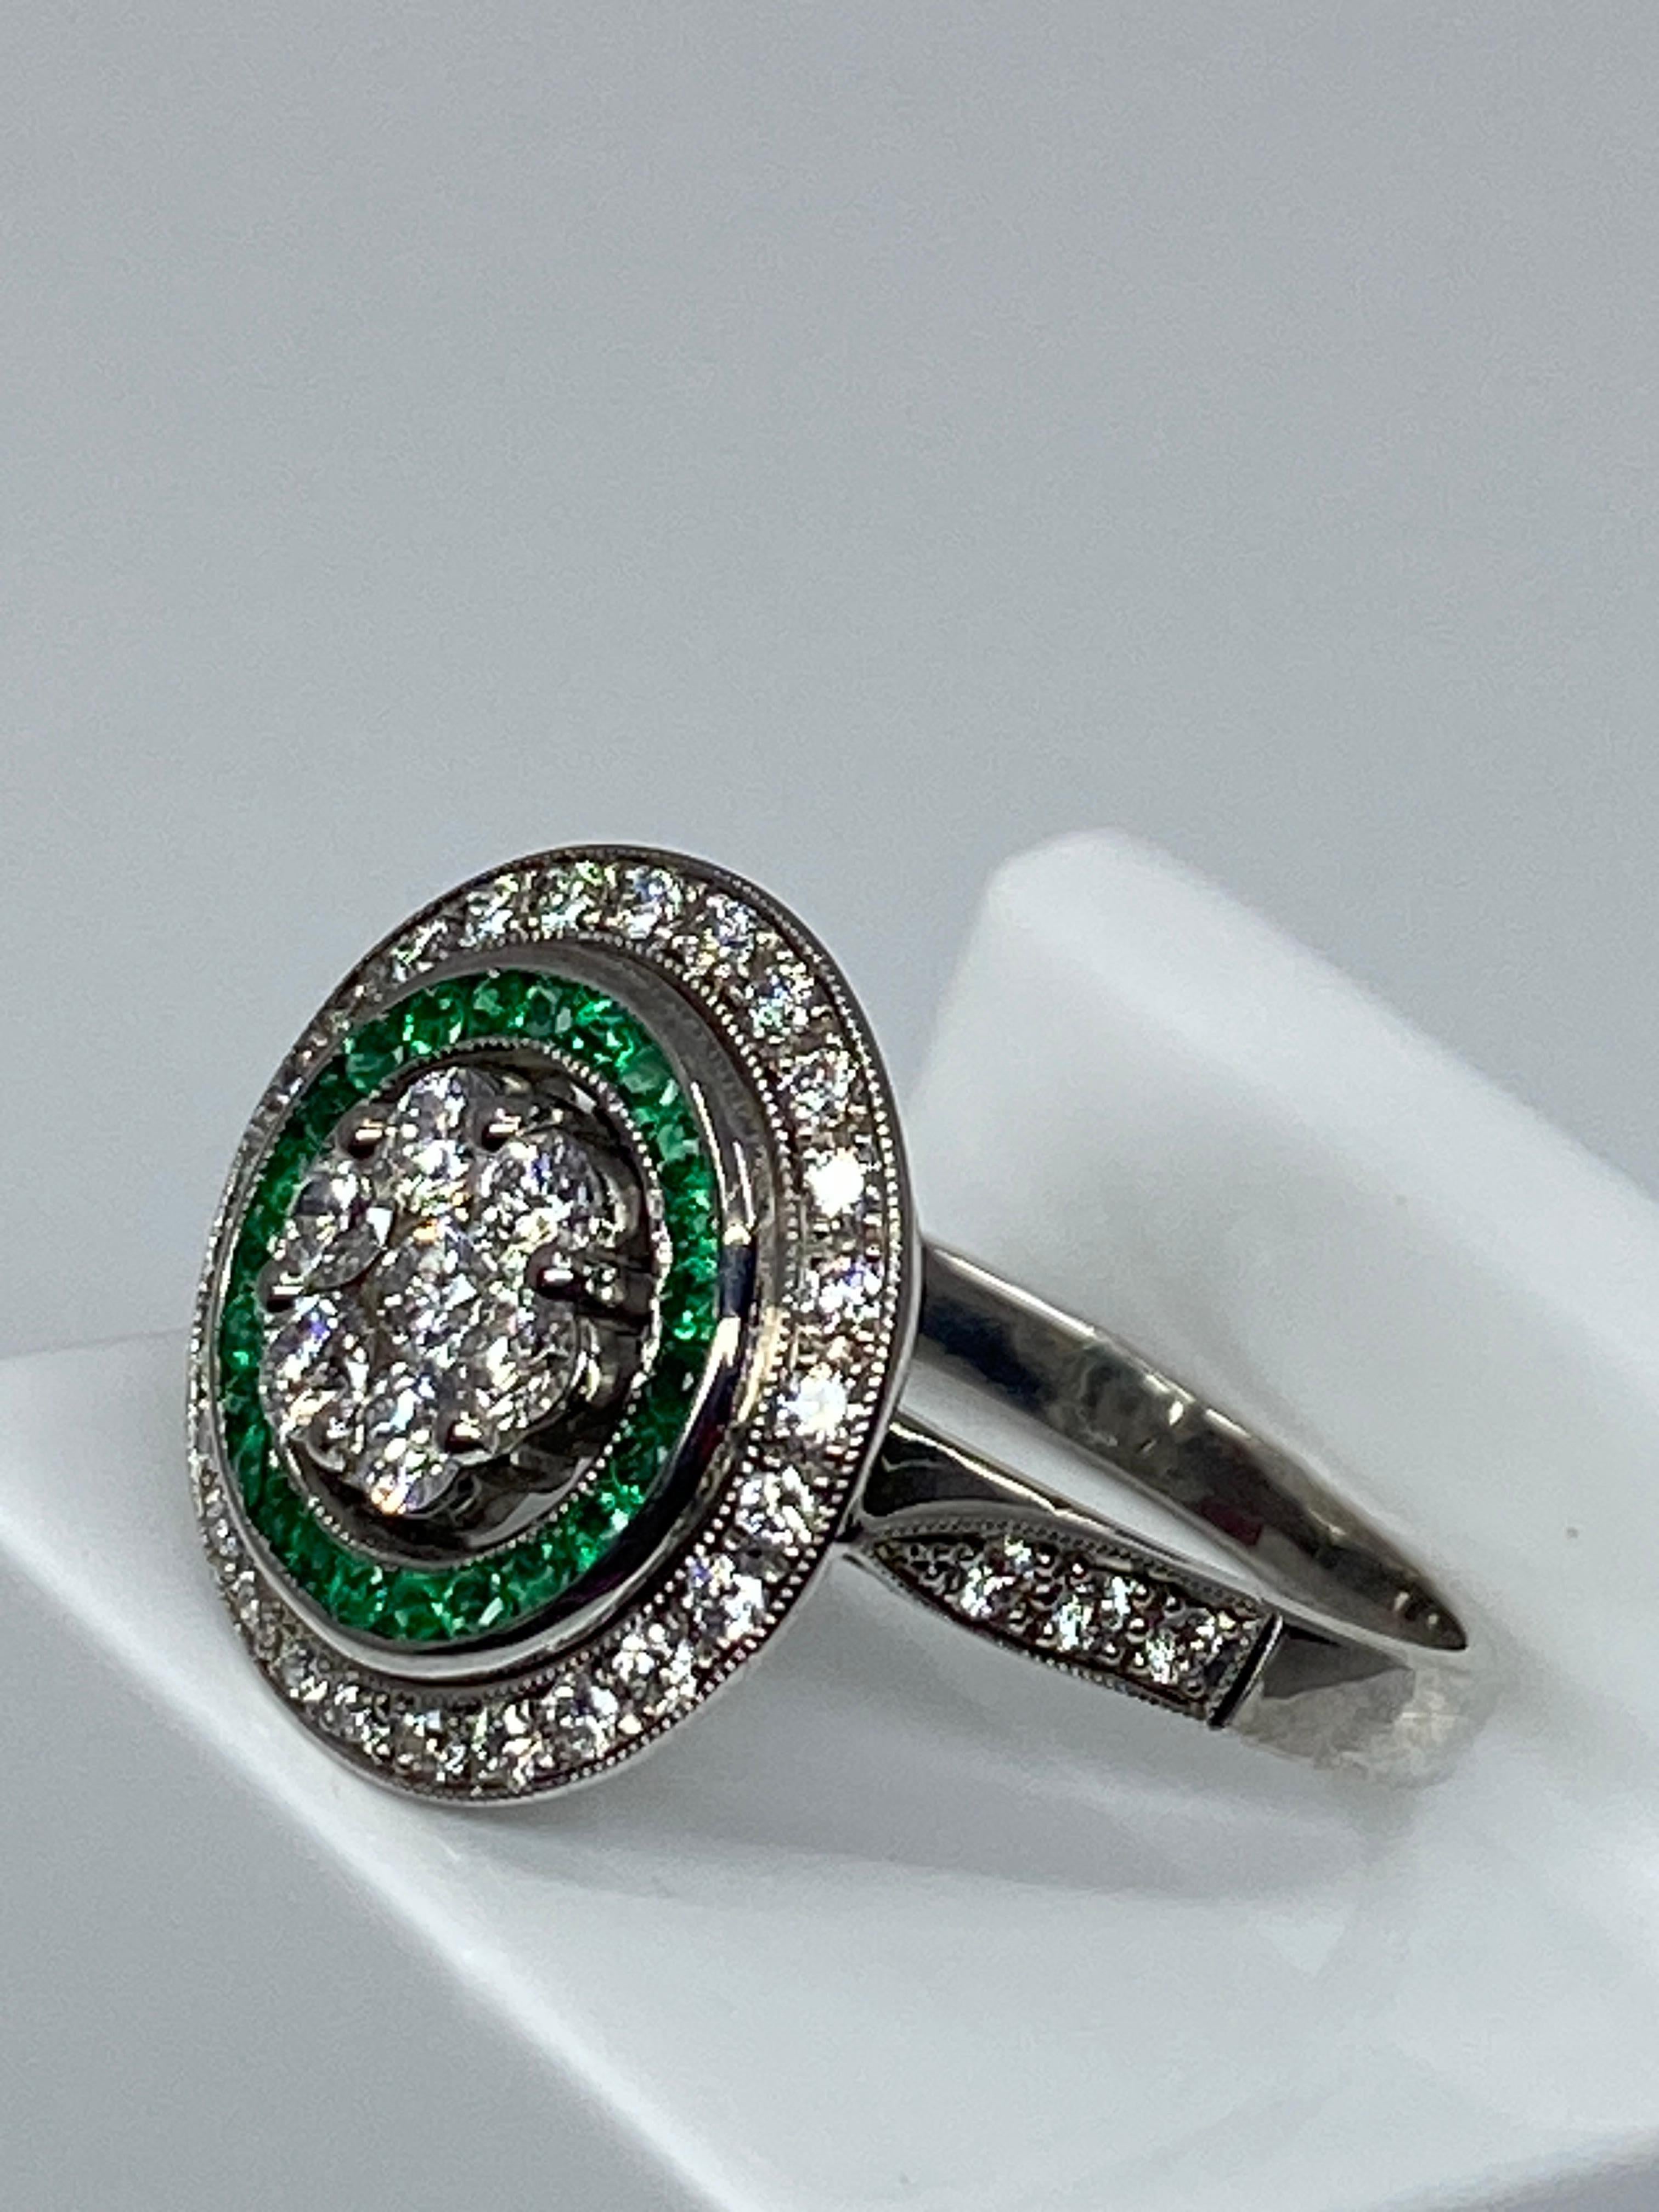 Women's or Men's 18 Carat Gold Round Ring Set with Calibrated Emeralds and Diamonds Art Déco Styl